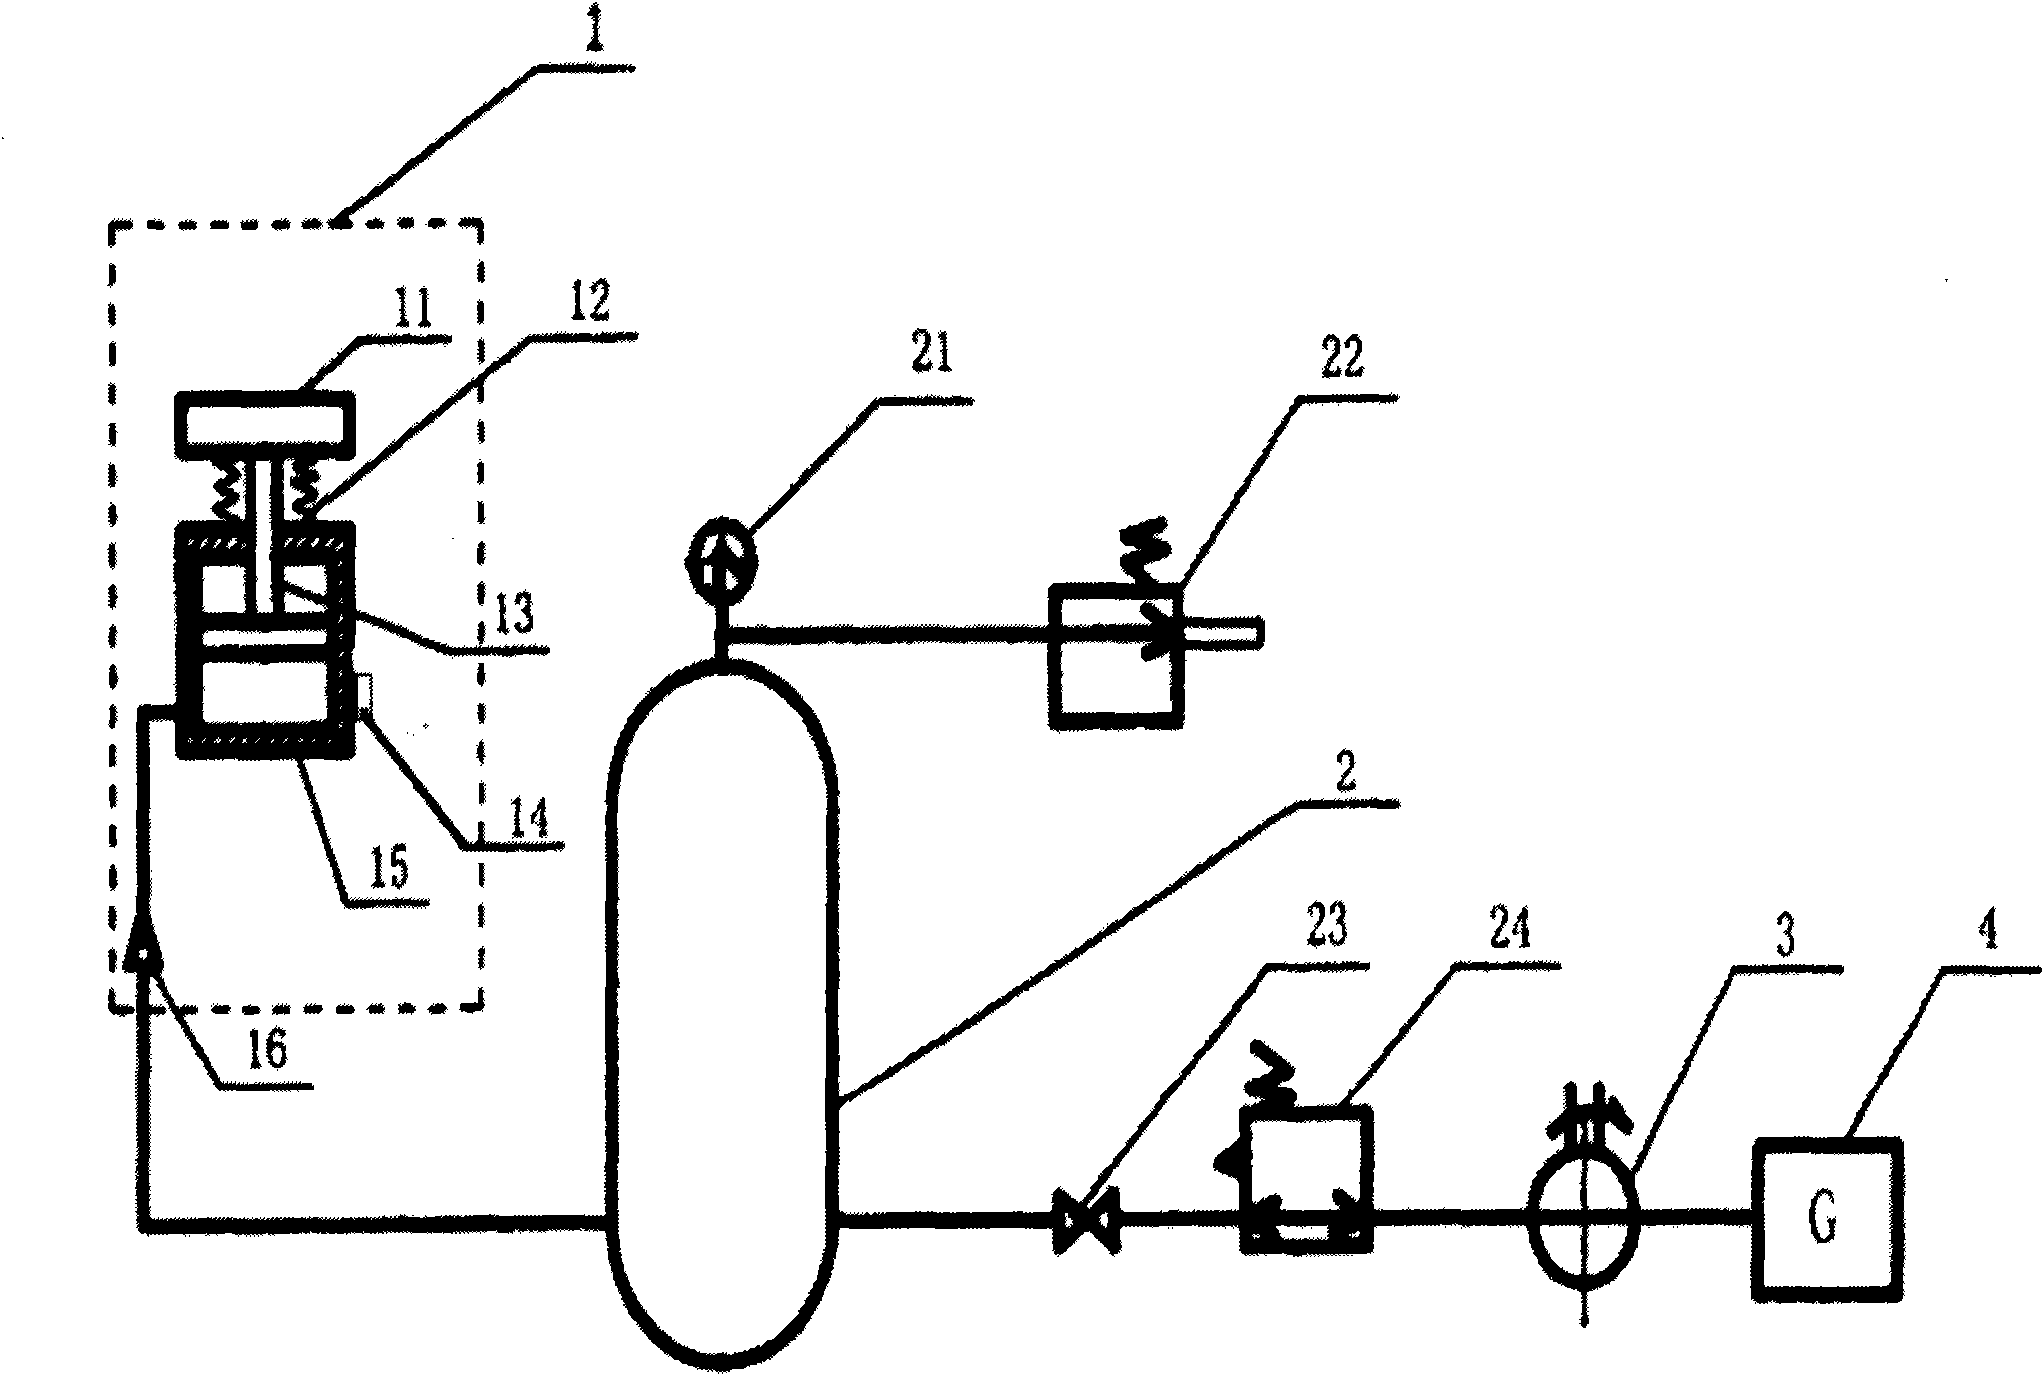 Novel energy recovery conversion device